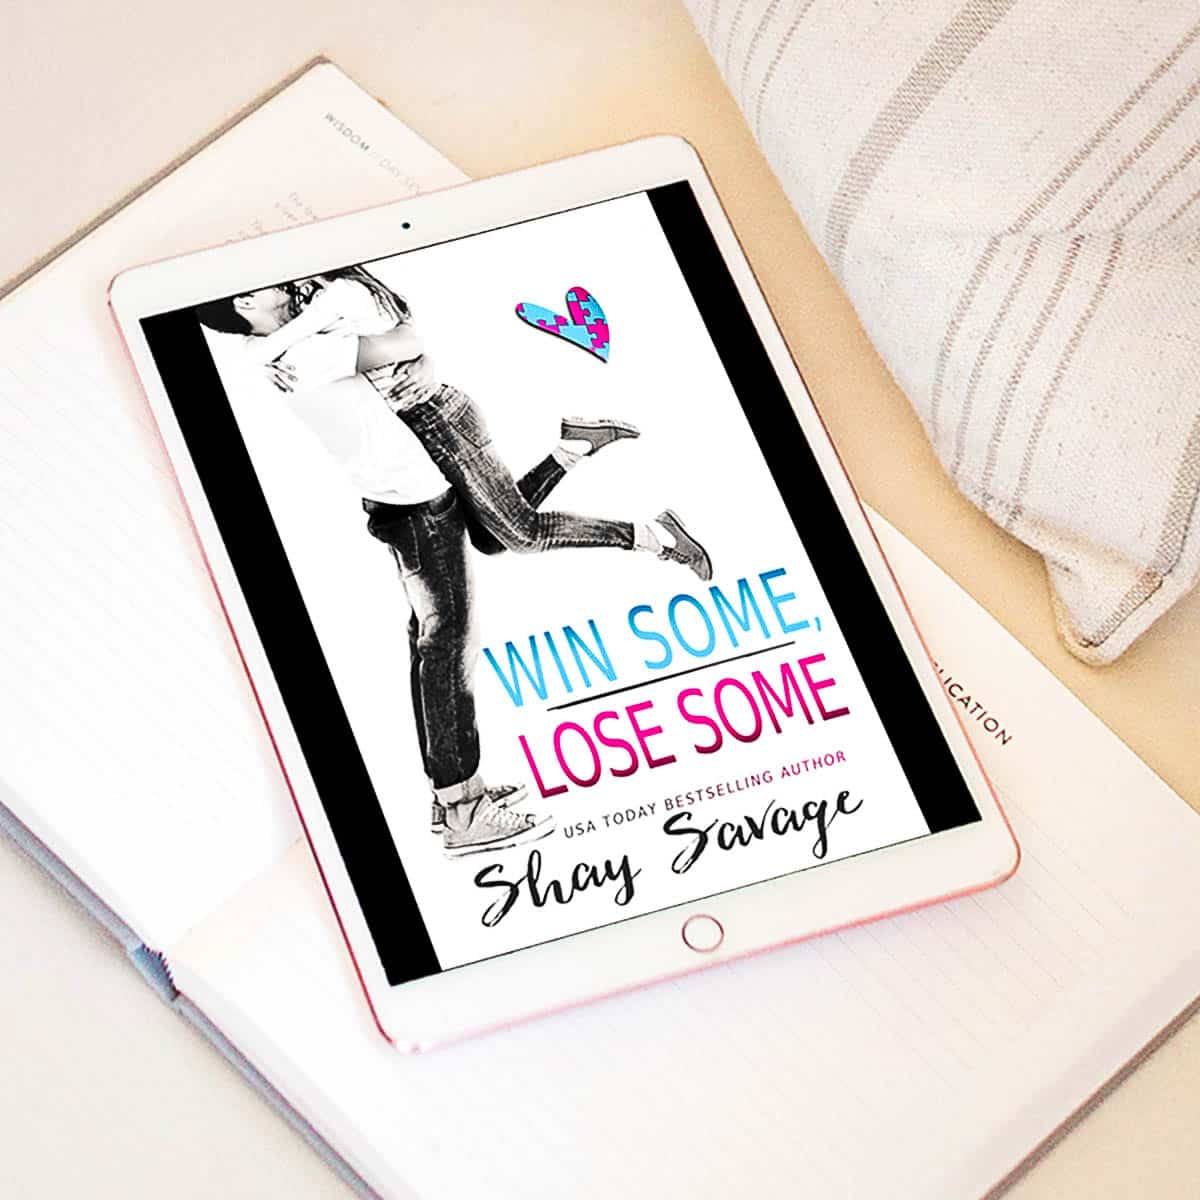 Win Some, Lose Some by Shay Savage is a realistic and poignant depiction of Matthew, a young man with Asperger’s Syndrome, and it is absolute perfection!